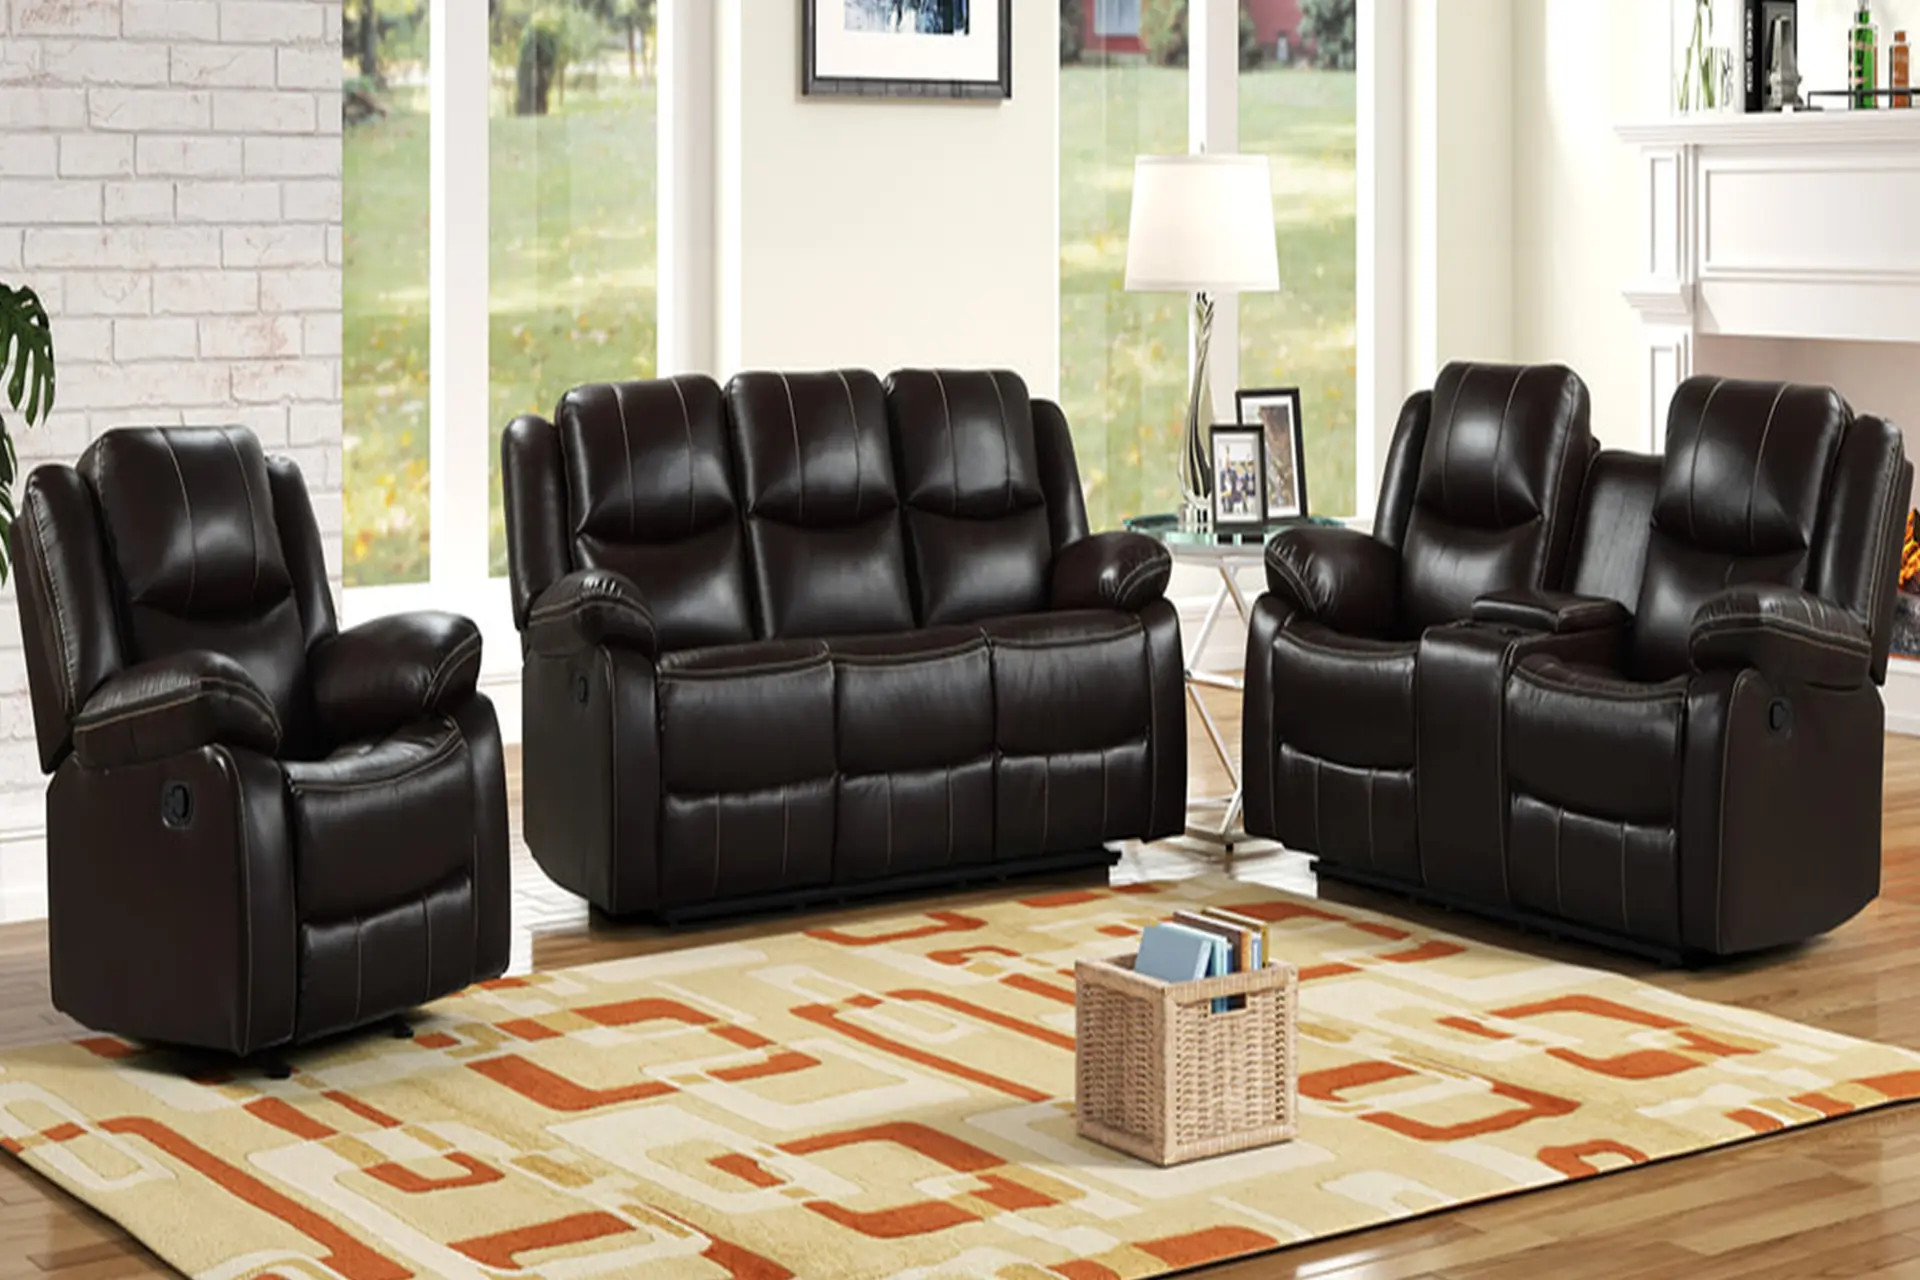 Carter Brown Reclining Sofa, Love, and Recliner.